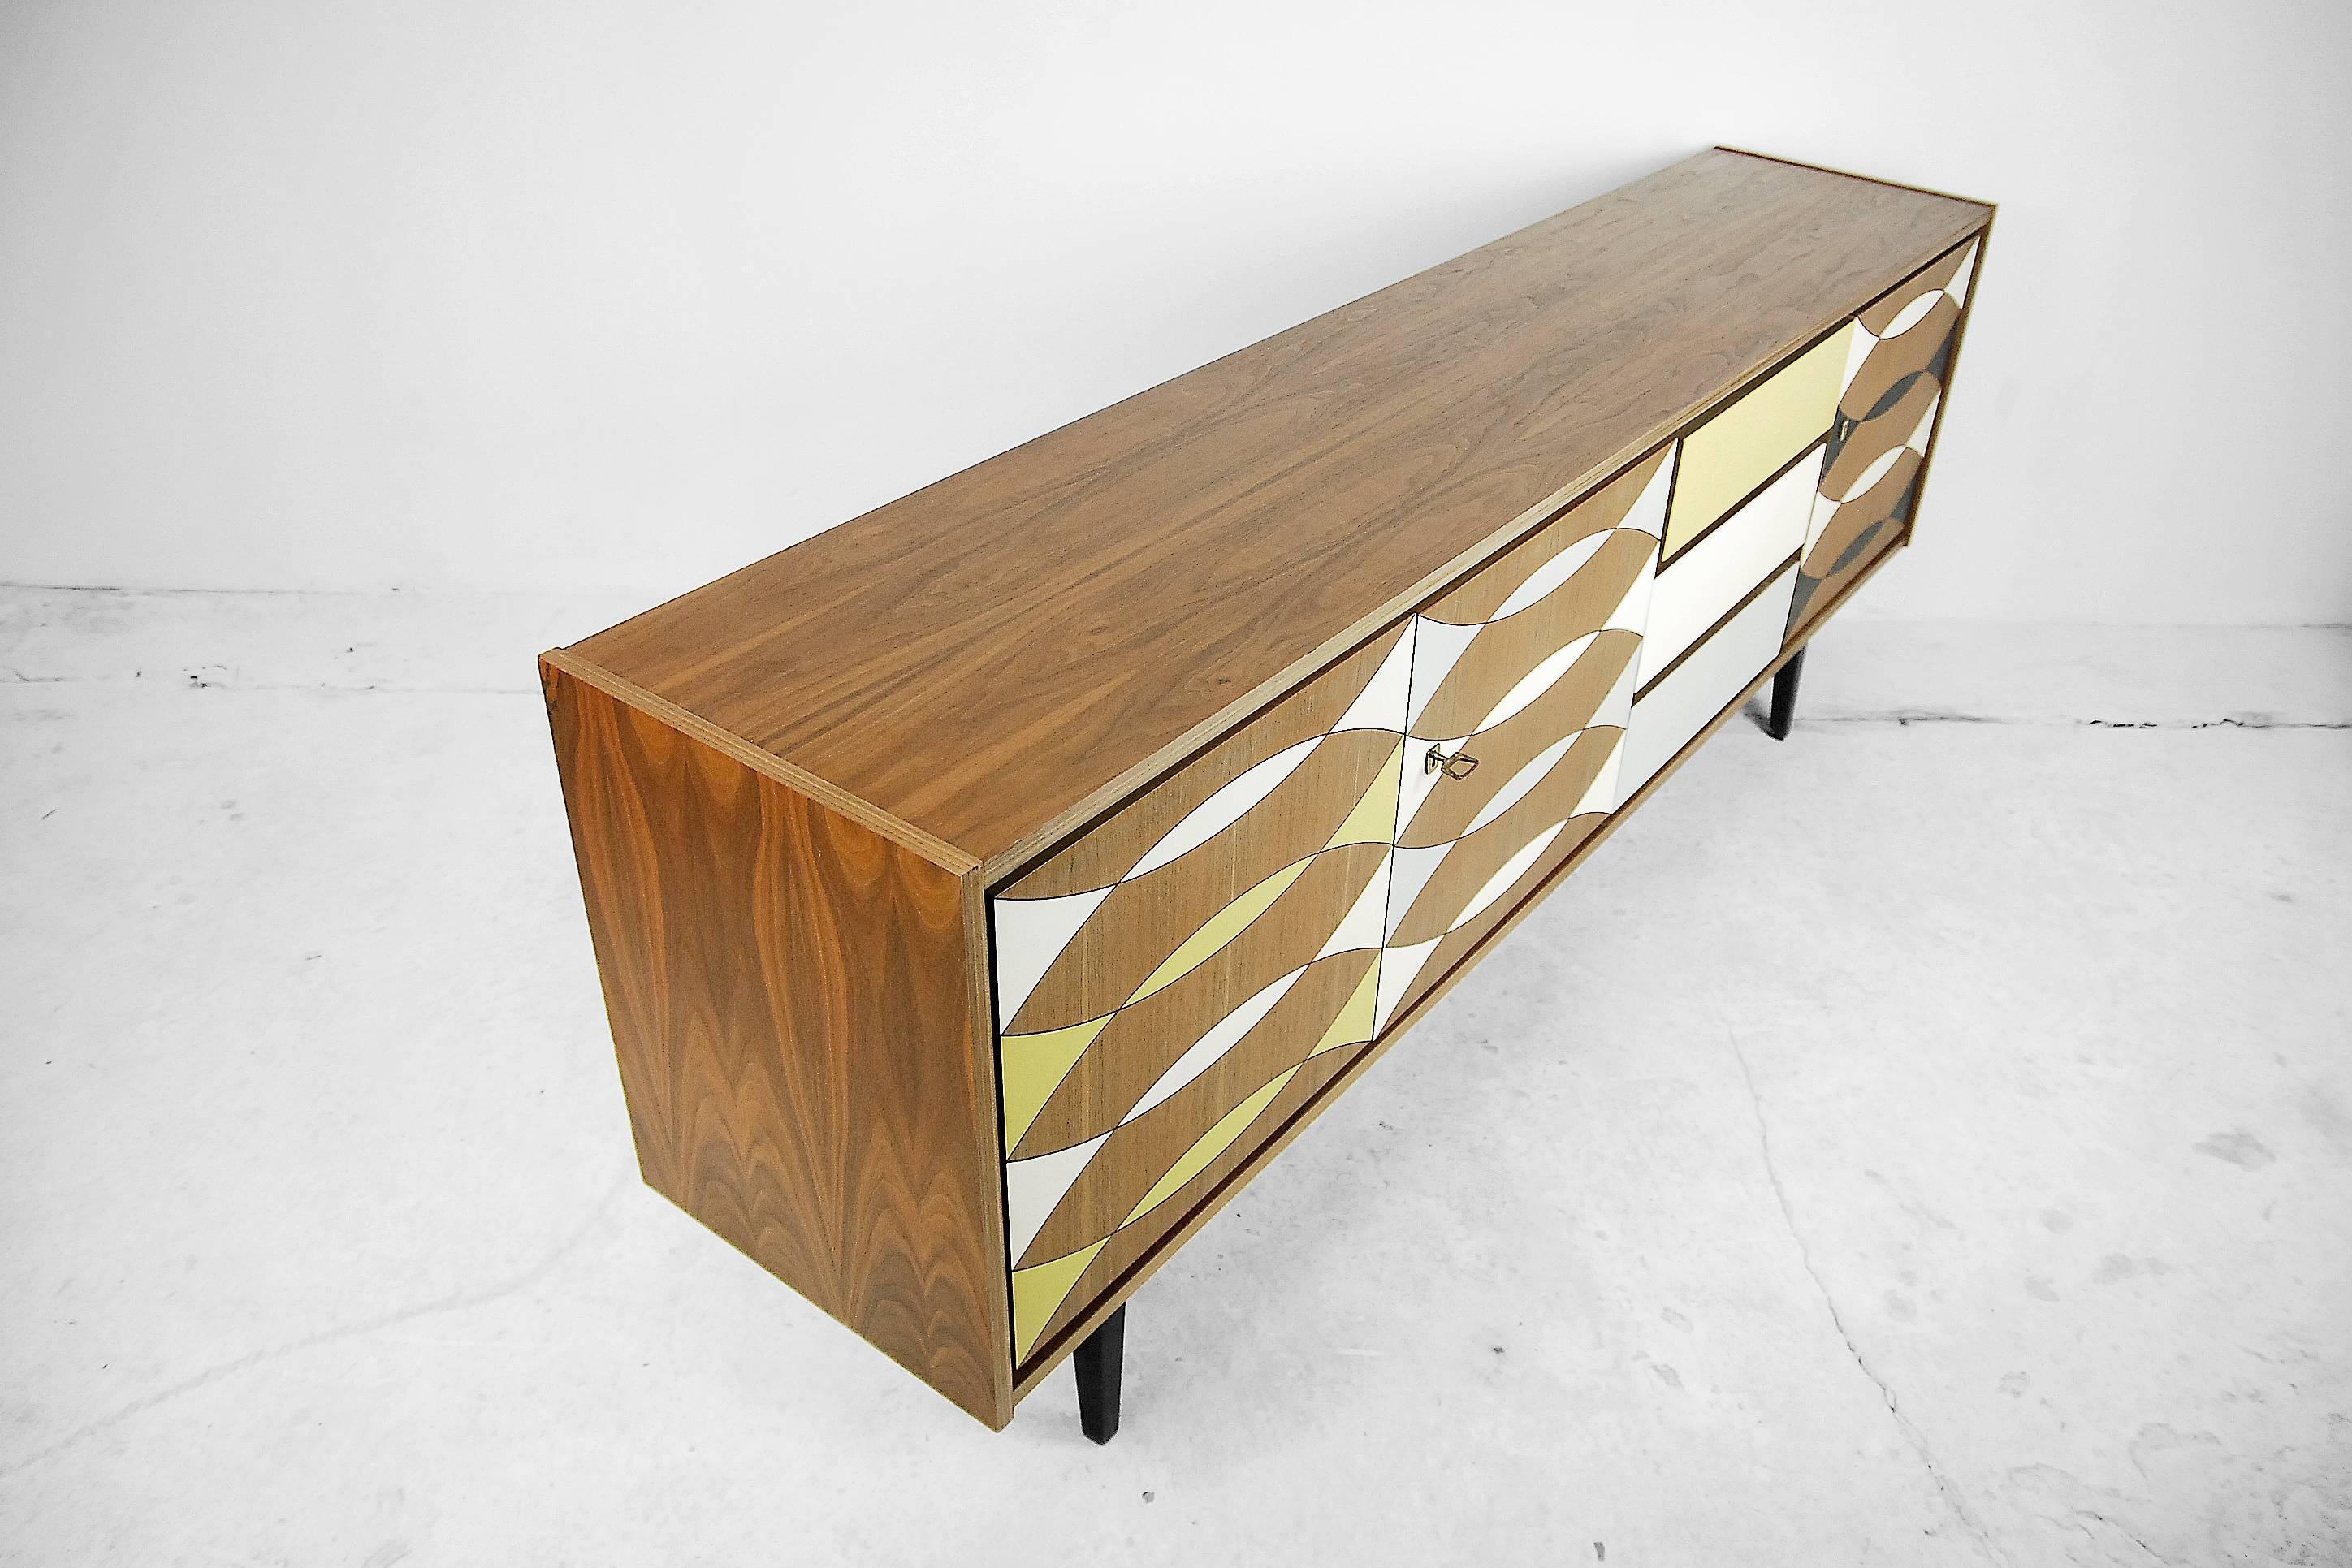 Hand-Painted Swedish Patterned Sideboard, 1960s